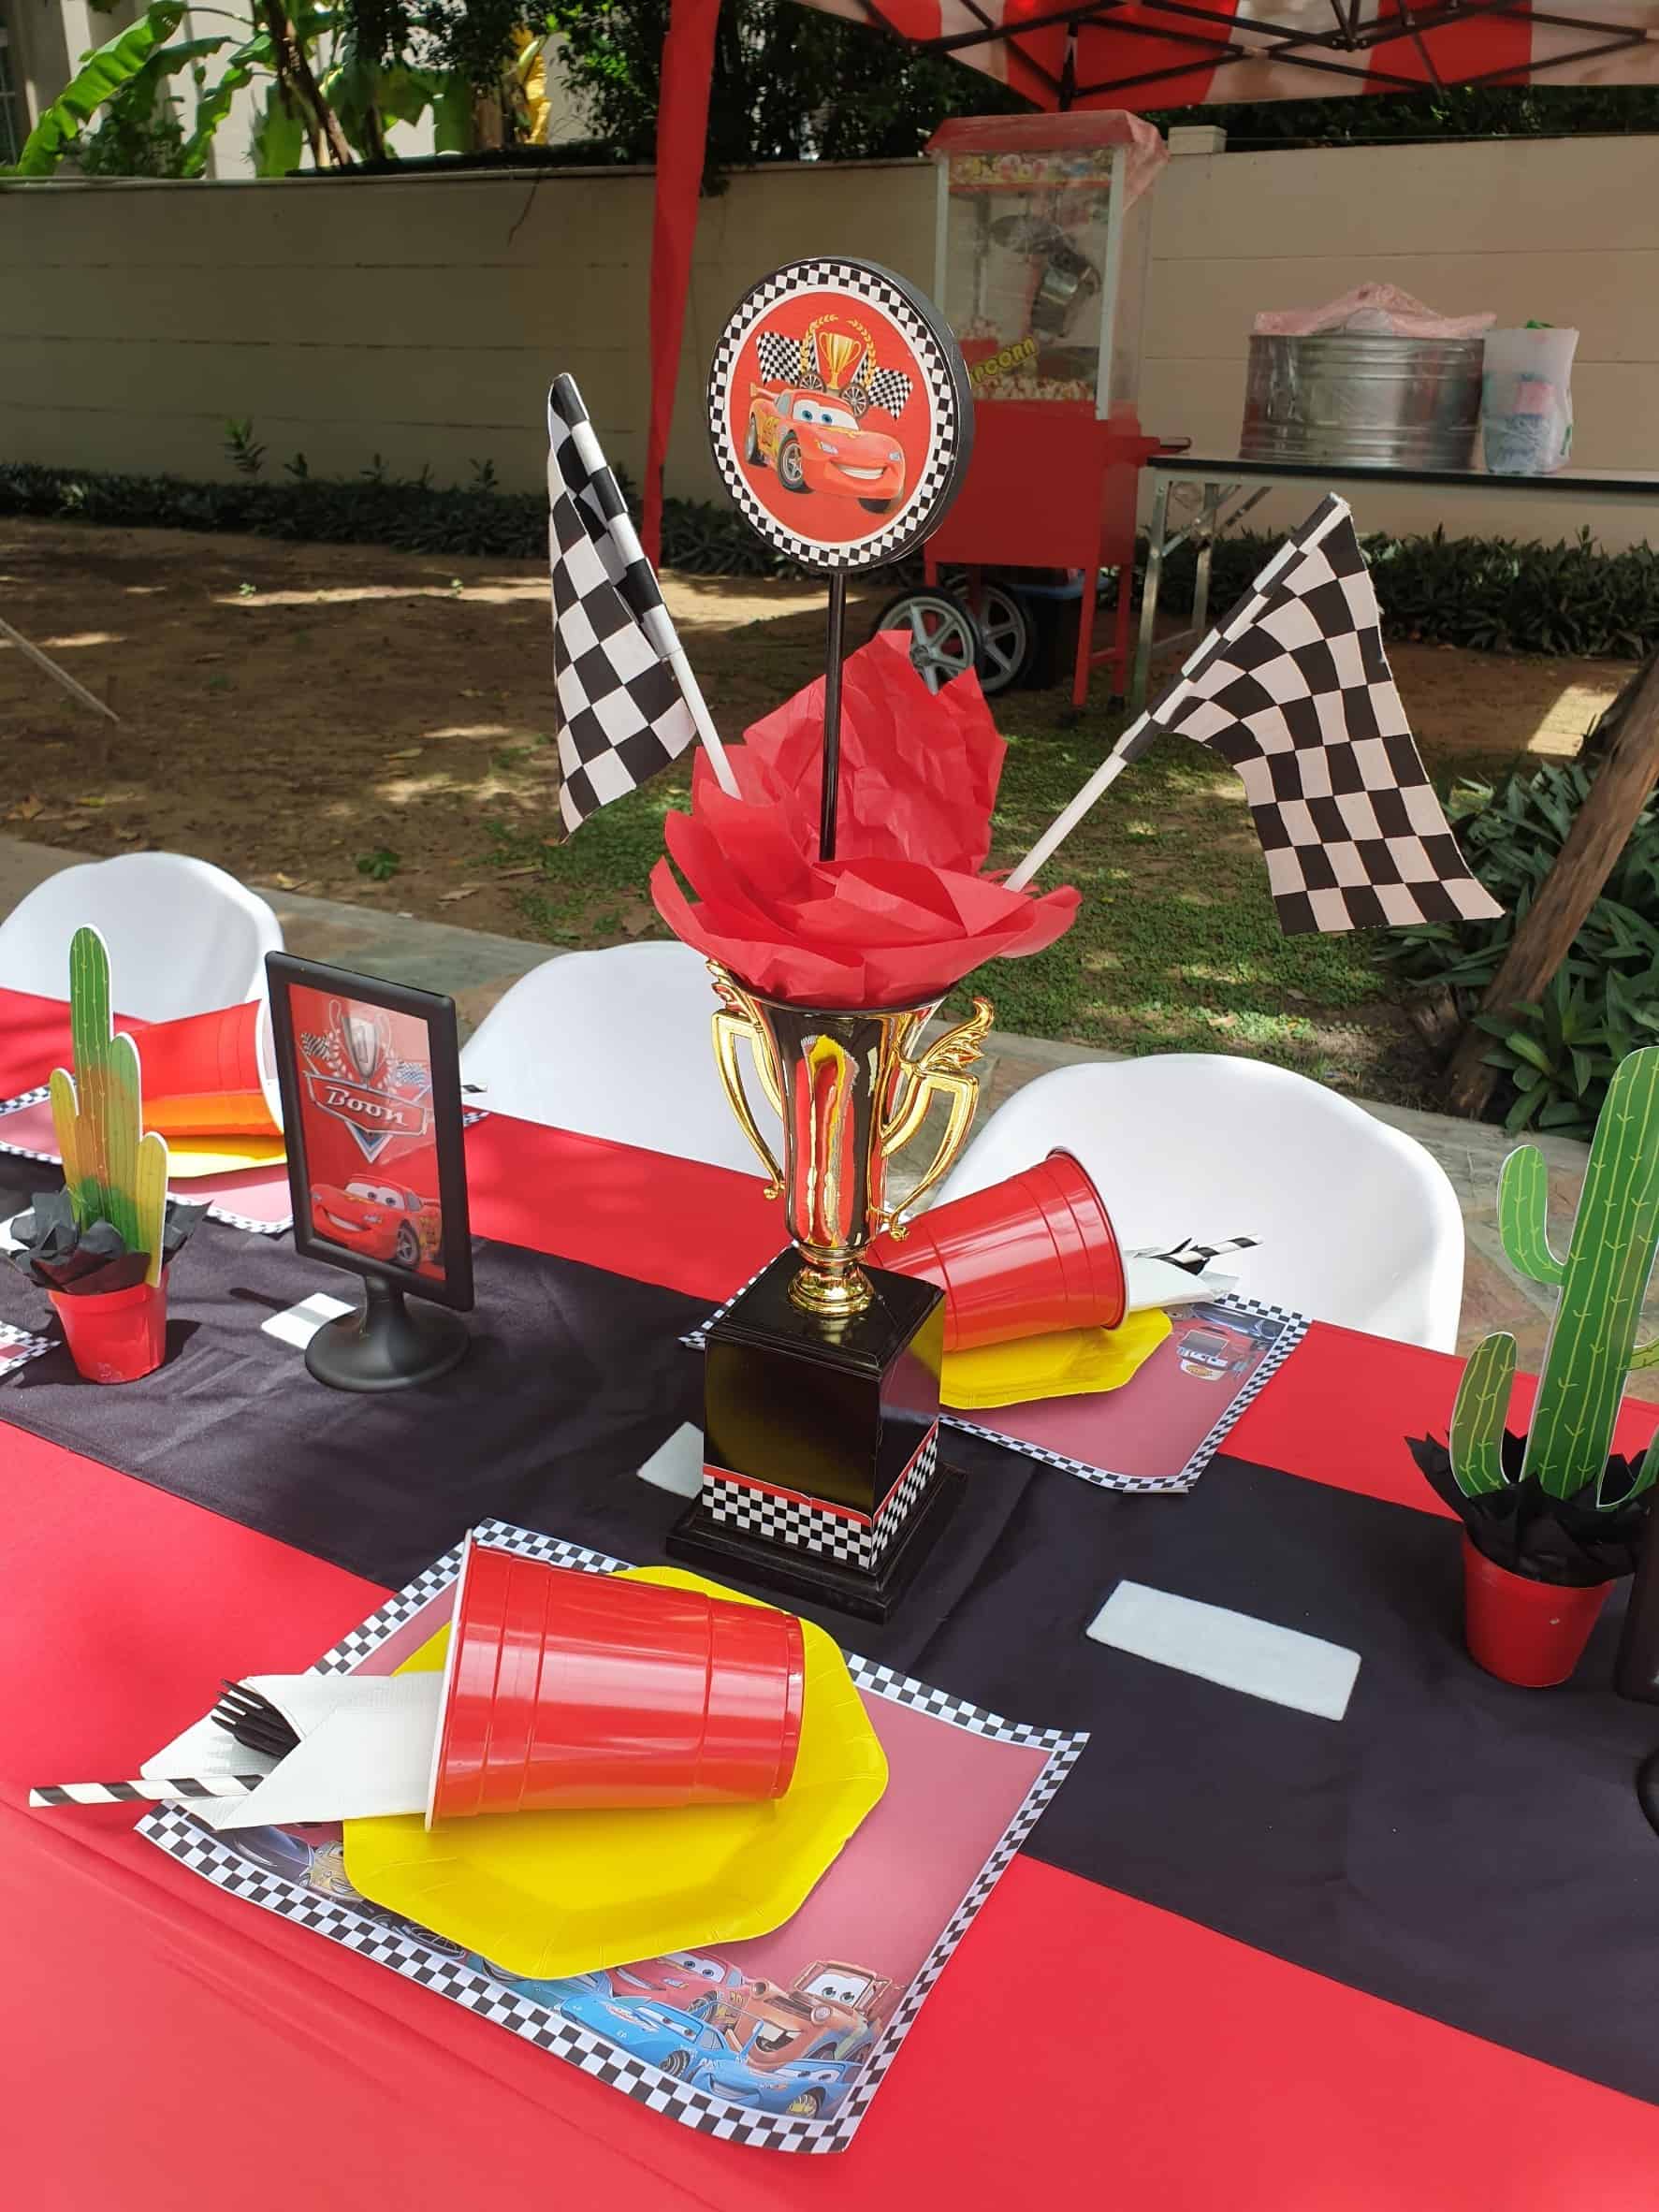 Cars Birthday Party with customized decoration, balloons  and activities - we are the party planner for kids birthday, providing one-stop party service in Bangkok area